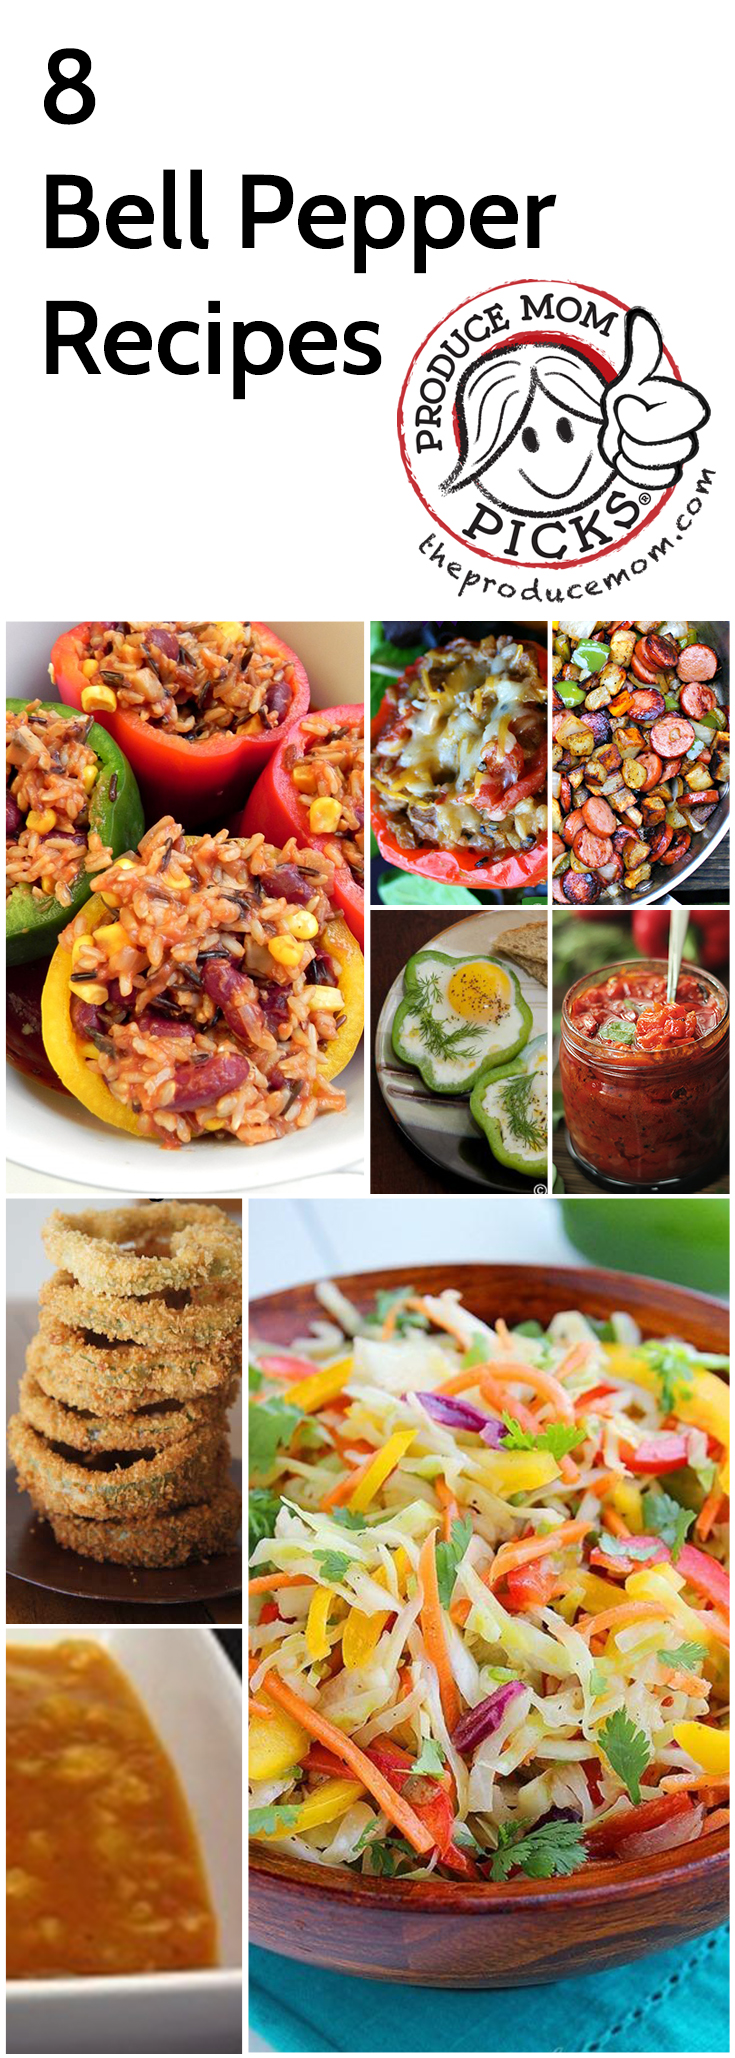 8 Bell Pepper Recipes from The Produce Mom